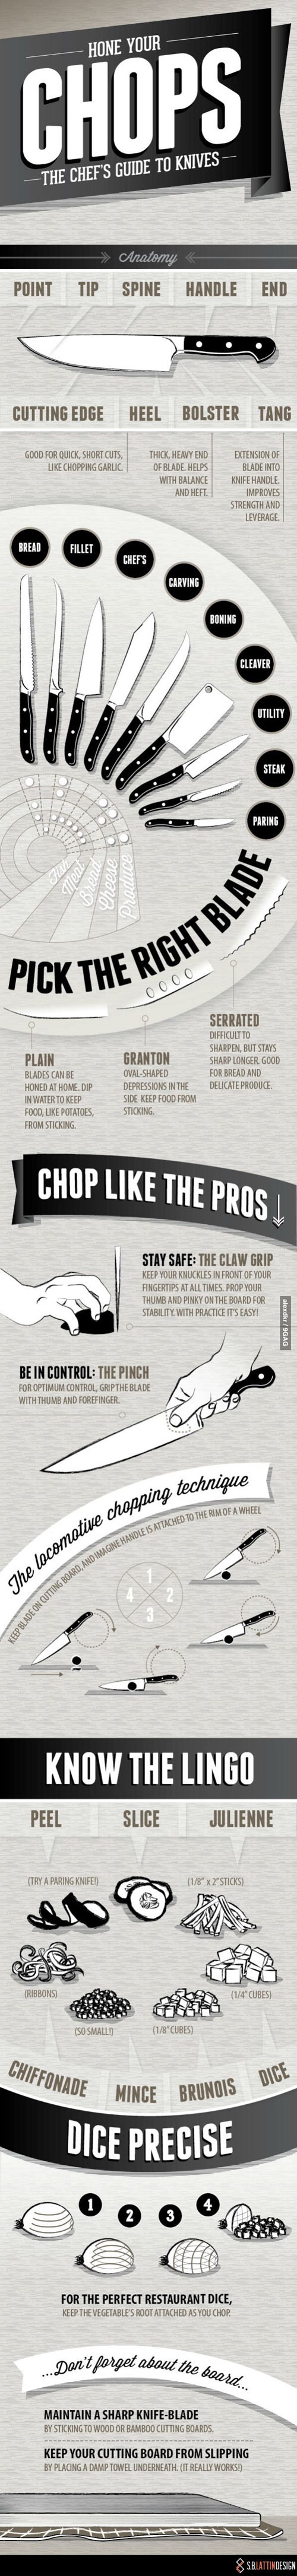 The Chef's Guide to Knives.